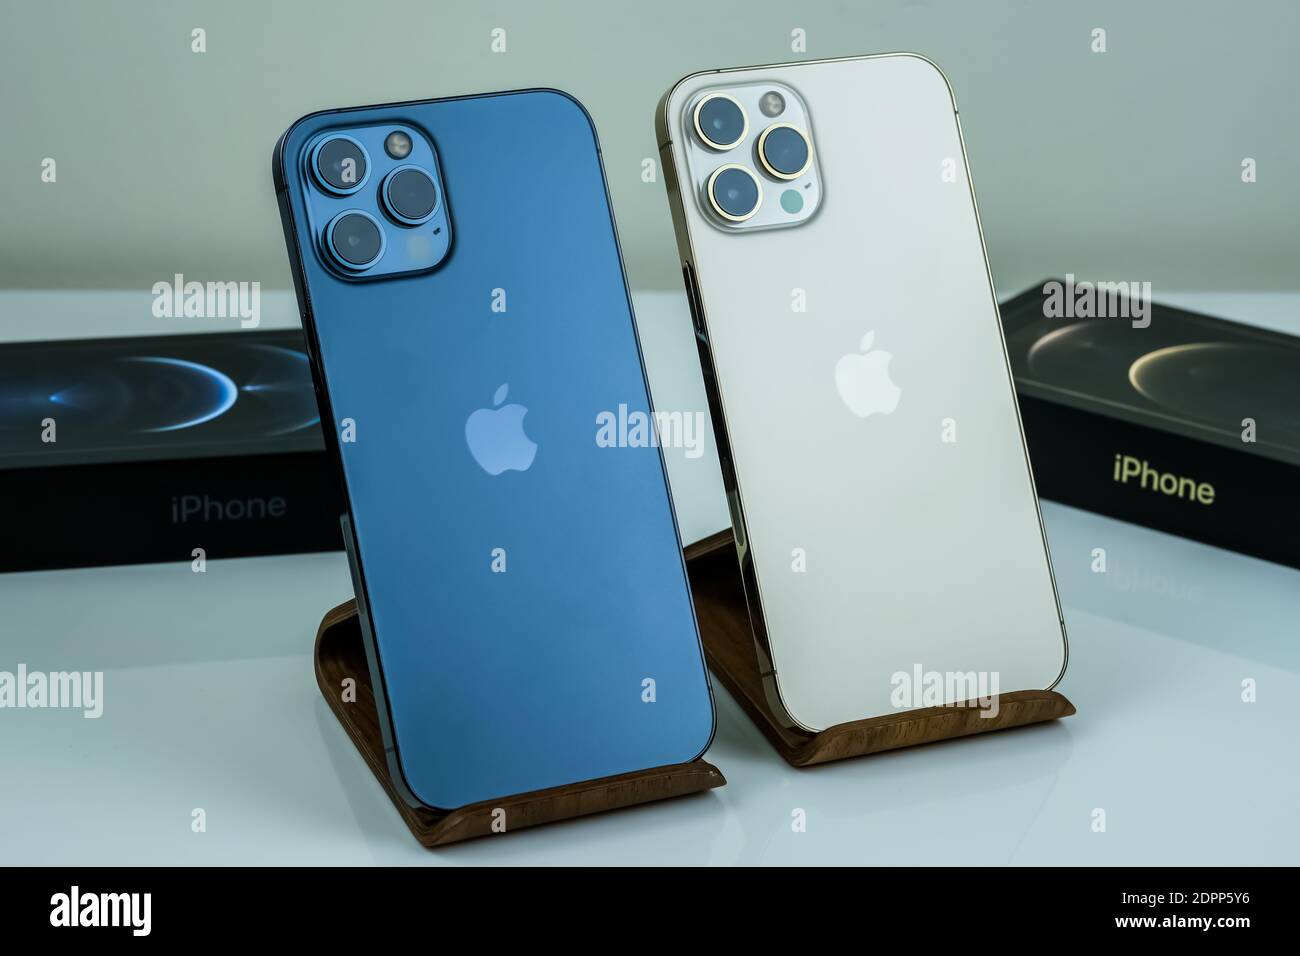 Iphone 12 Pro Max Pacific Blue Next To Iphone 12 Pro Max In Gold Stock Photo Alamy